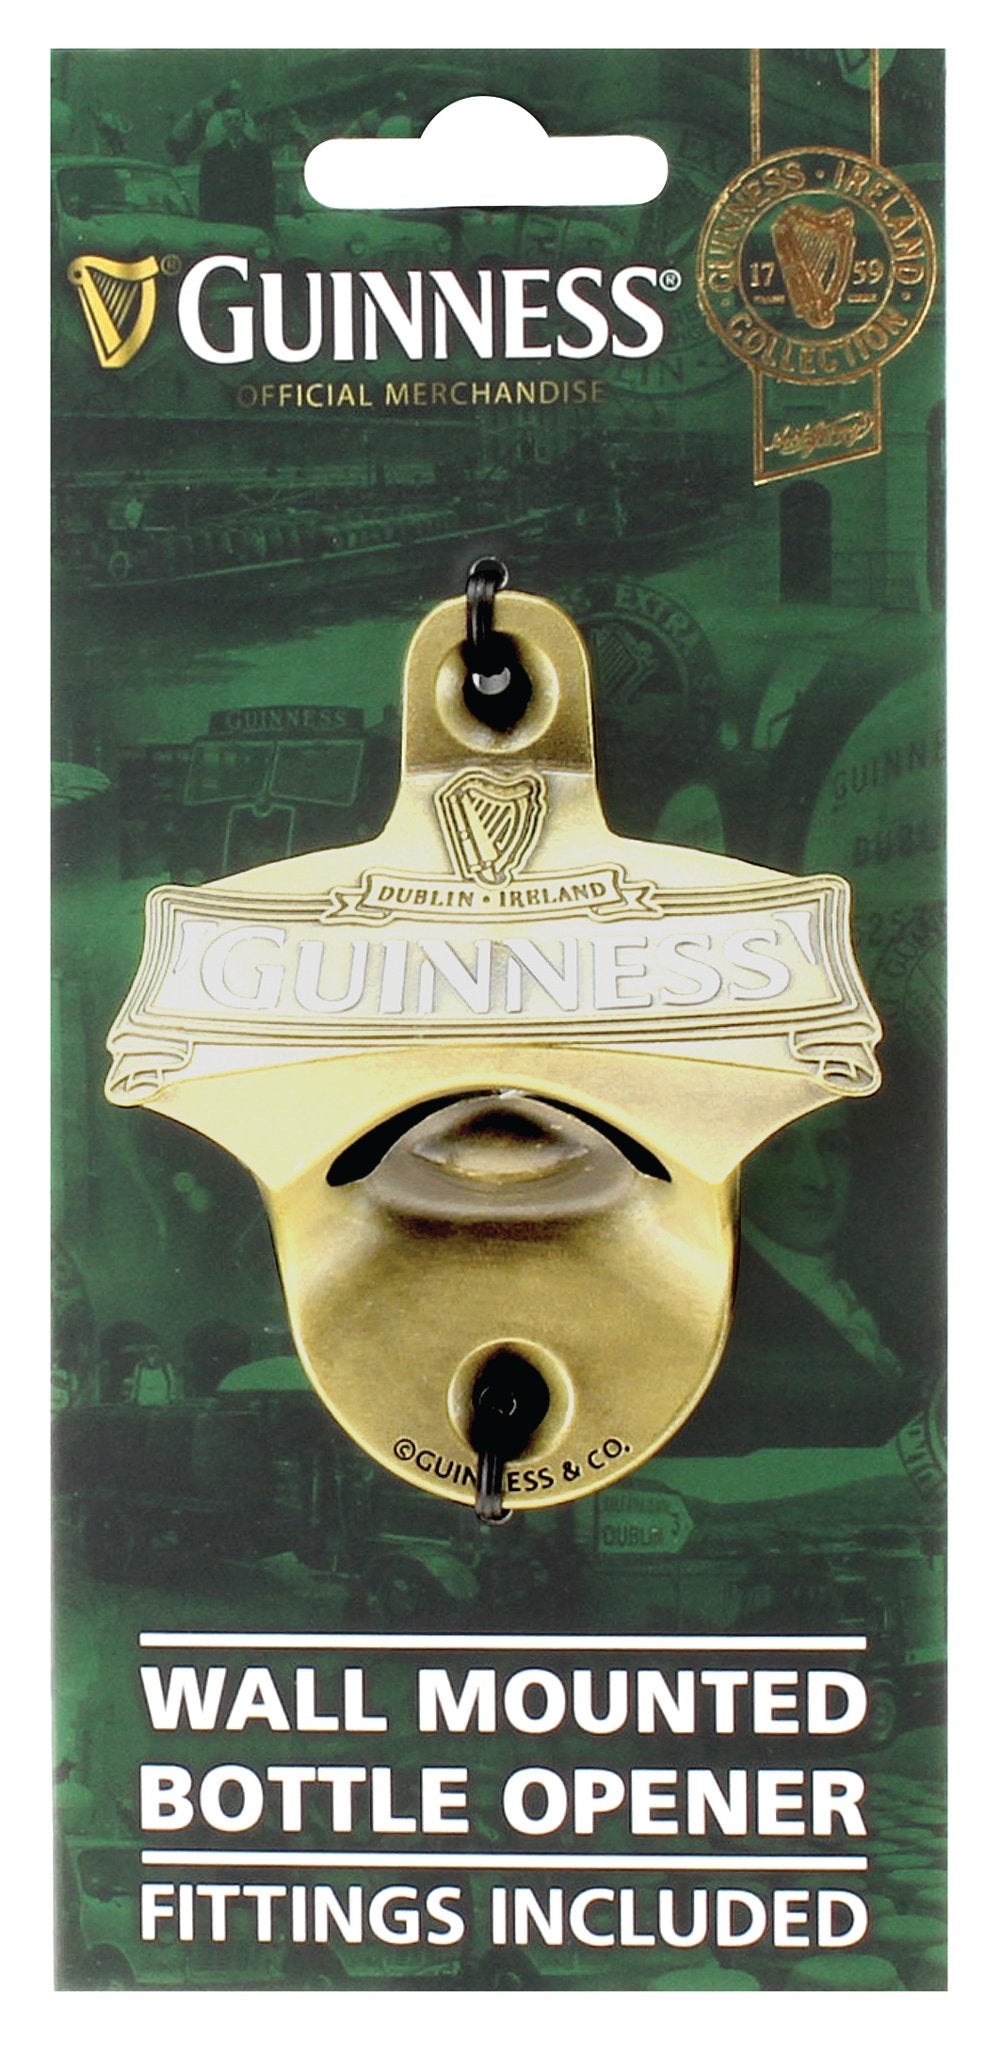 This Guinness wall mounted bottle opener from Ireland is perfect for any beer enthusiast.